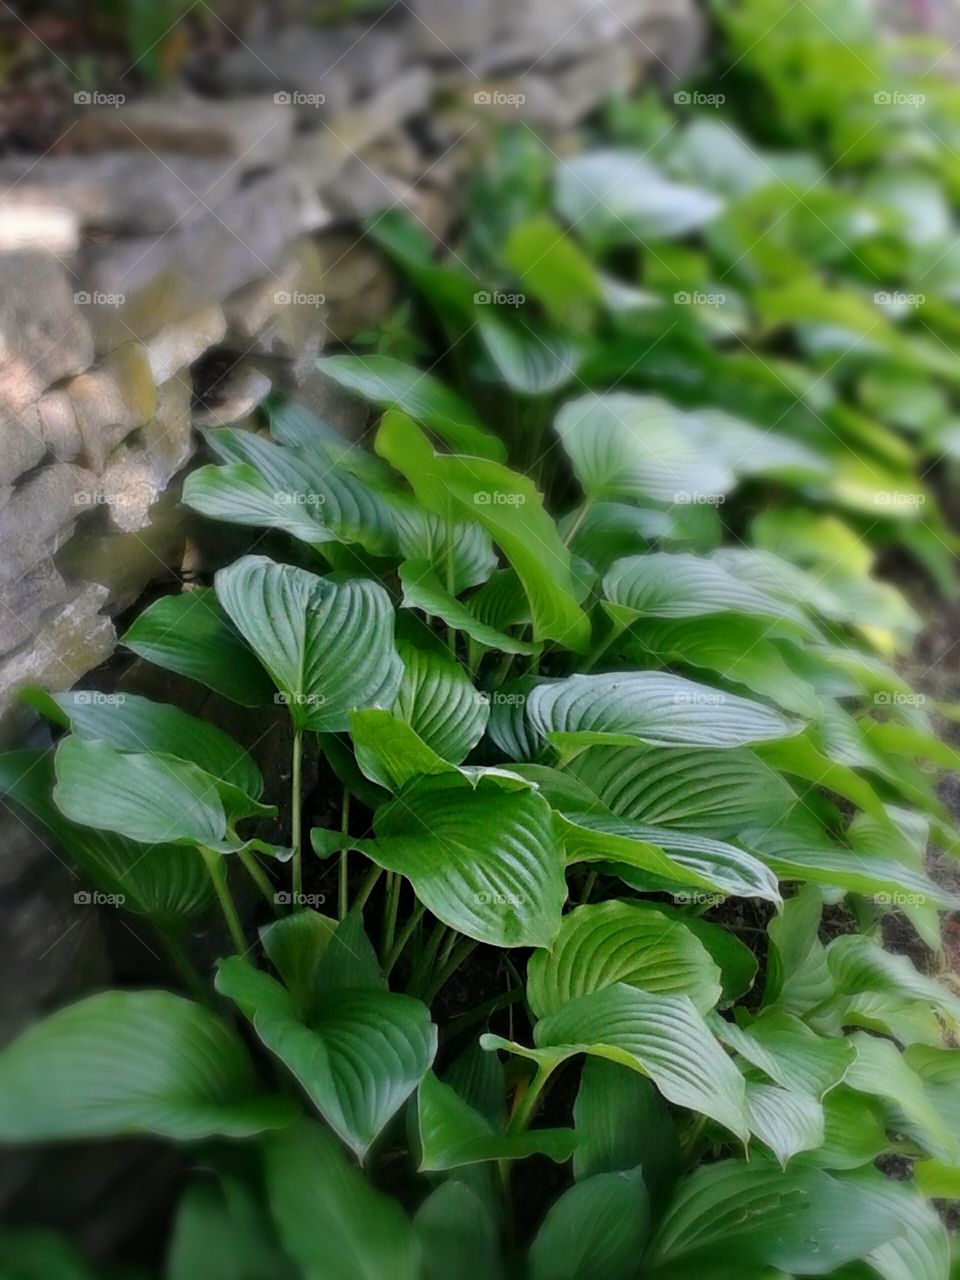 Greystone wall planted with aaaah..  The green of these Hostas creates a soothing and eye appealing picture.